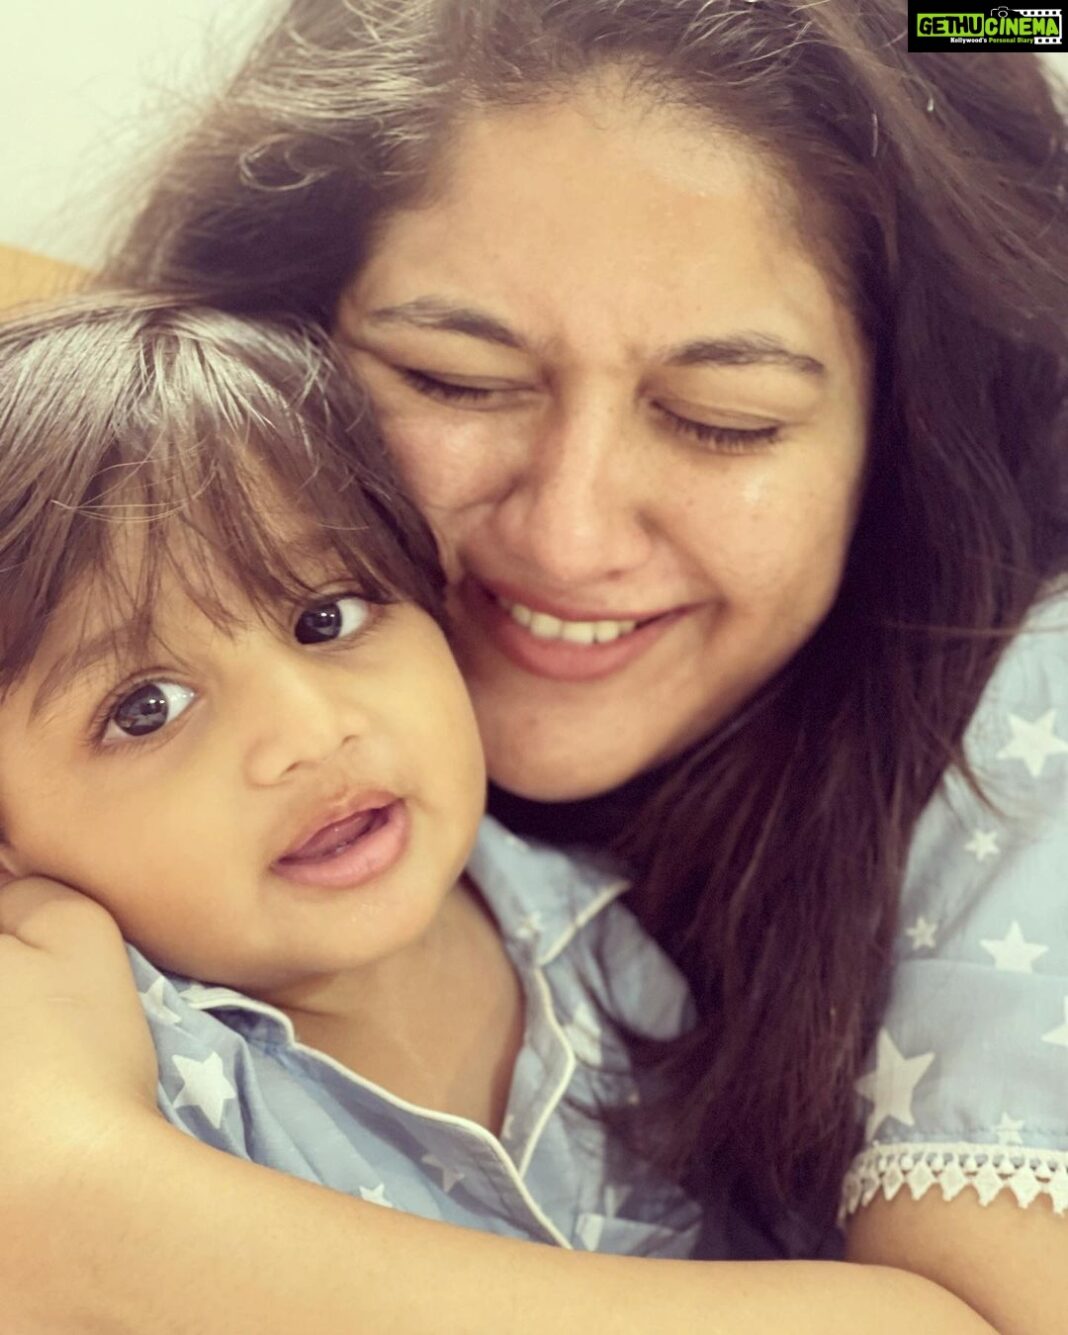 Meghana Raj Instagram - Our baby…. Our world… our universe… our EVERYTHING! CHIRU… our lil prince is ONE YEAR OLD! I will squish him till he says ‘amma stop!’ And continue squishing him till he turns red wid embarrassment! Will smother him wid kisses til he rolls his eyes and says, ‘amma!’ And will continue smothering him witb more kisses! I love u my baby child… ur growing up so so fast!! I wish we cld just lay cuddled in each others arms for all eternity! HAPPY BIRTHDAY RAAYAN! Appa and amma love you! ❤️ @lasya_umesh thank you for this click!!! We love u! @kiddlekiddlle this is definitely very special!